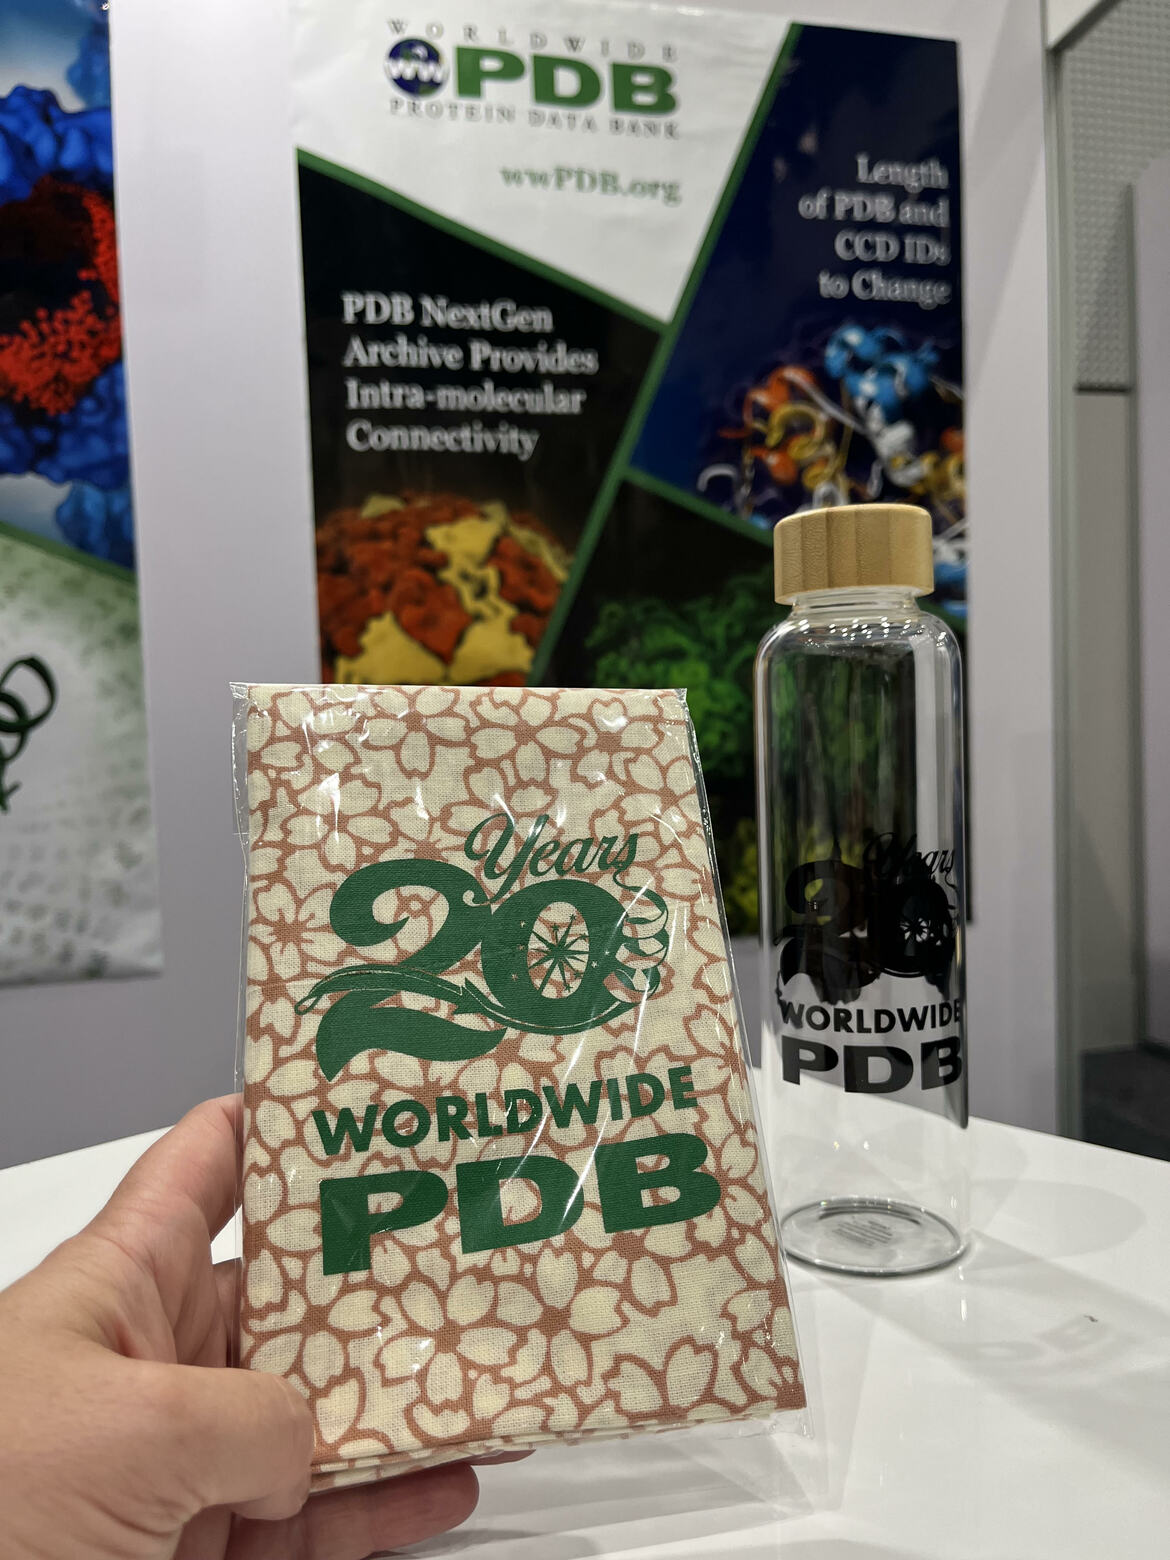 <I>Visit the wwPDB booth to receive a wwPDB towel that celebrates the 20th anniversary of the partnership</I>